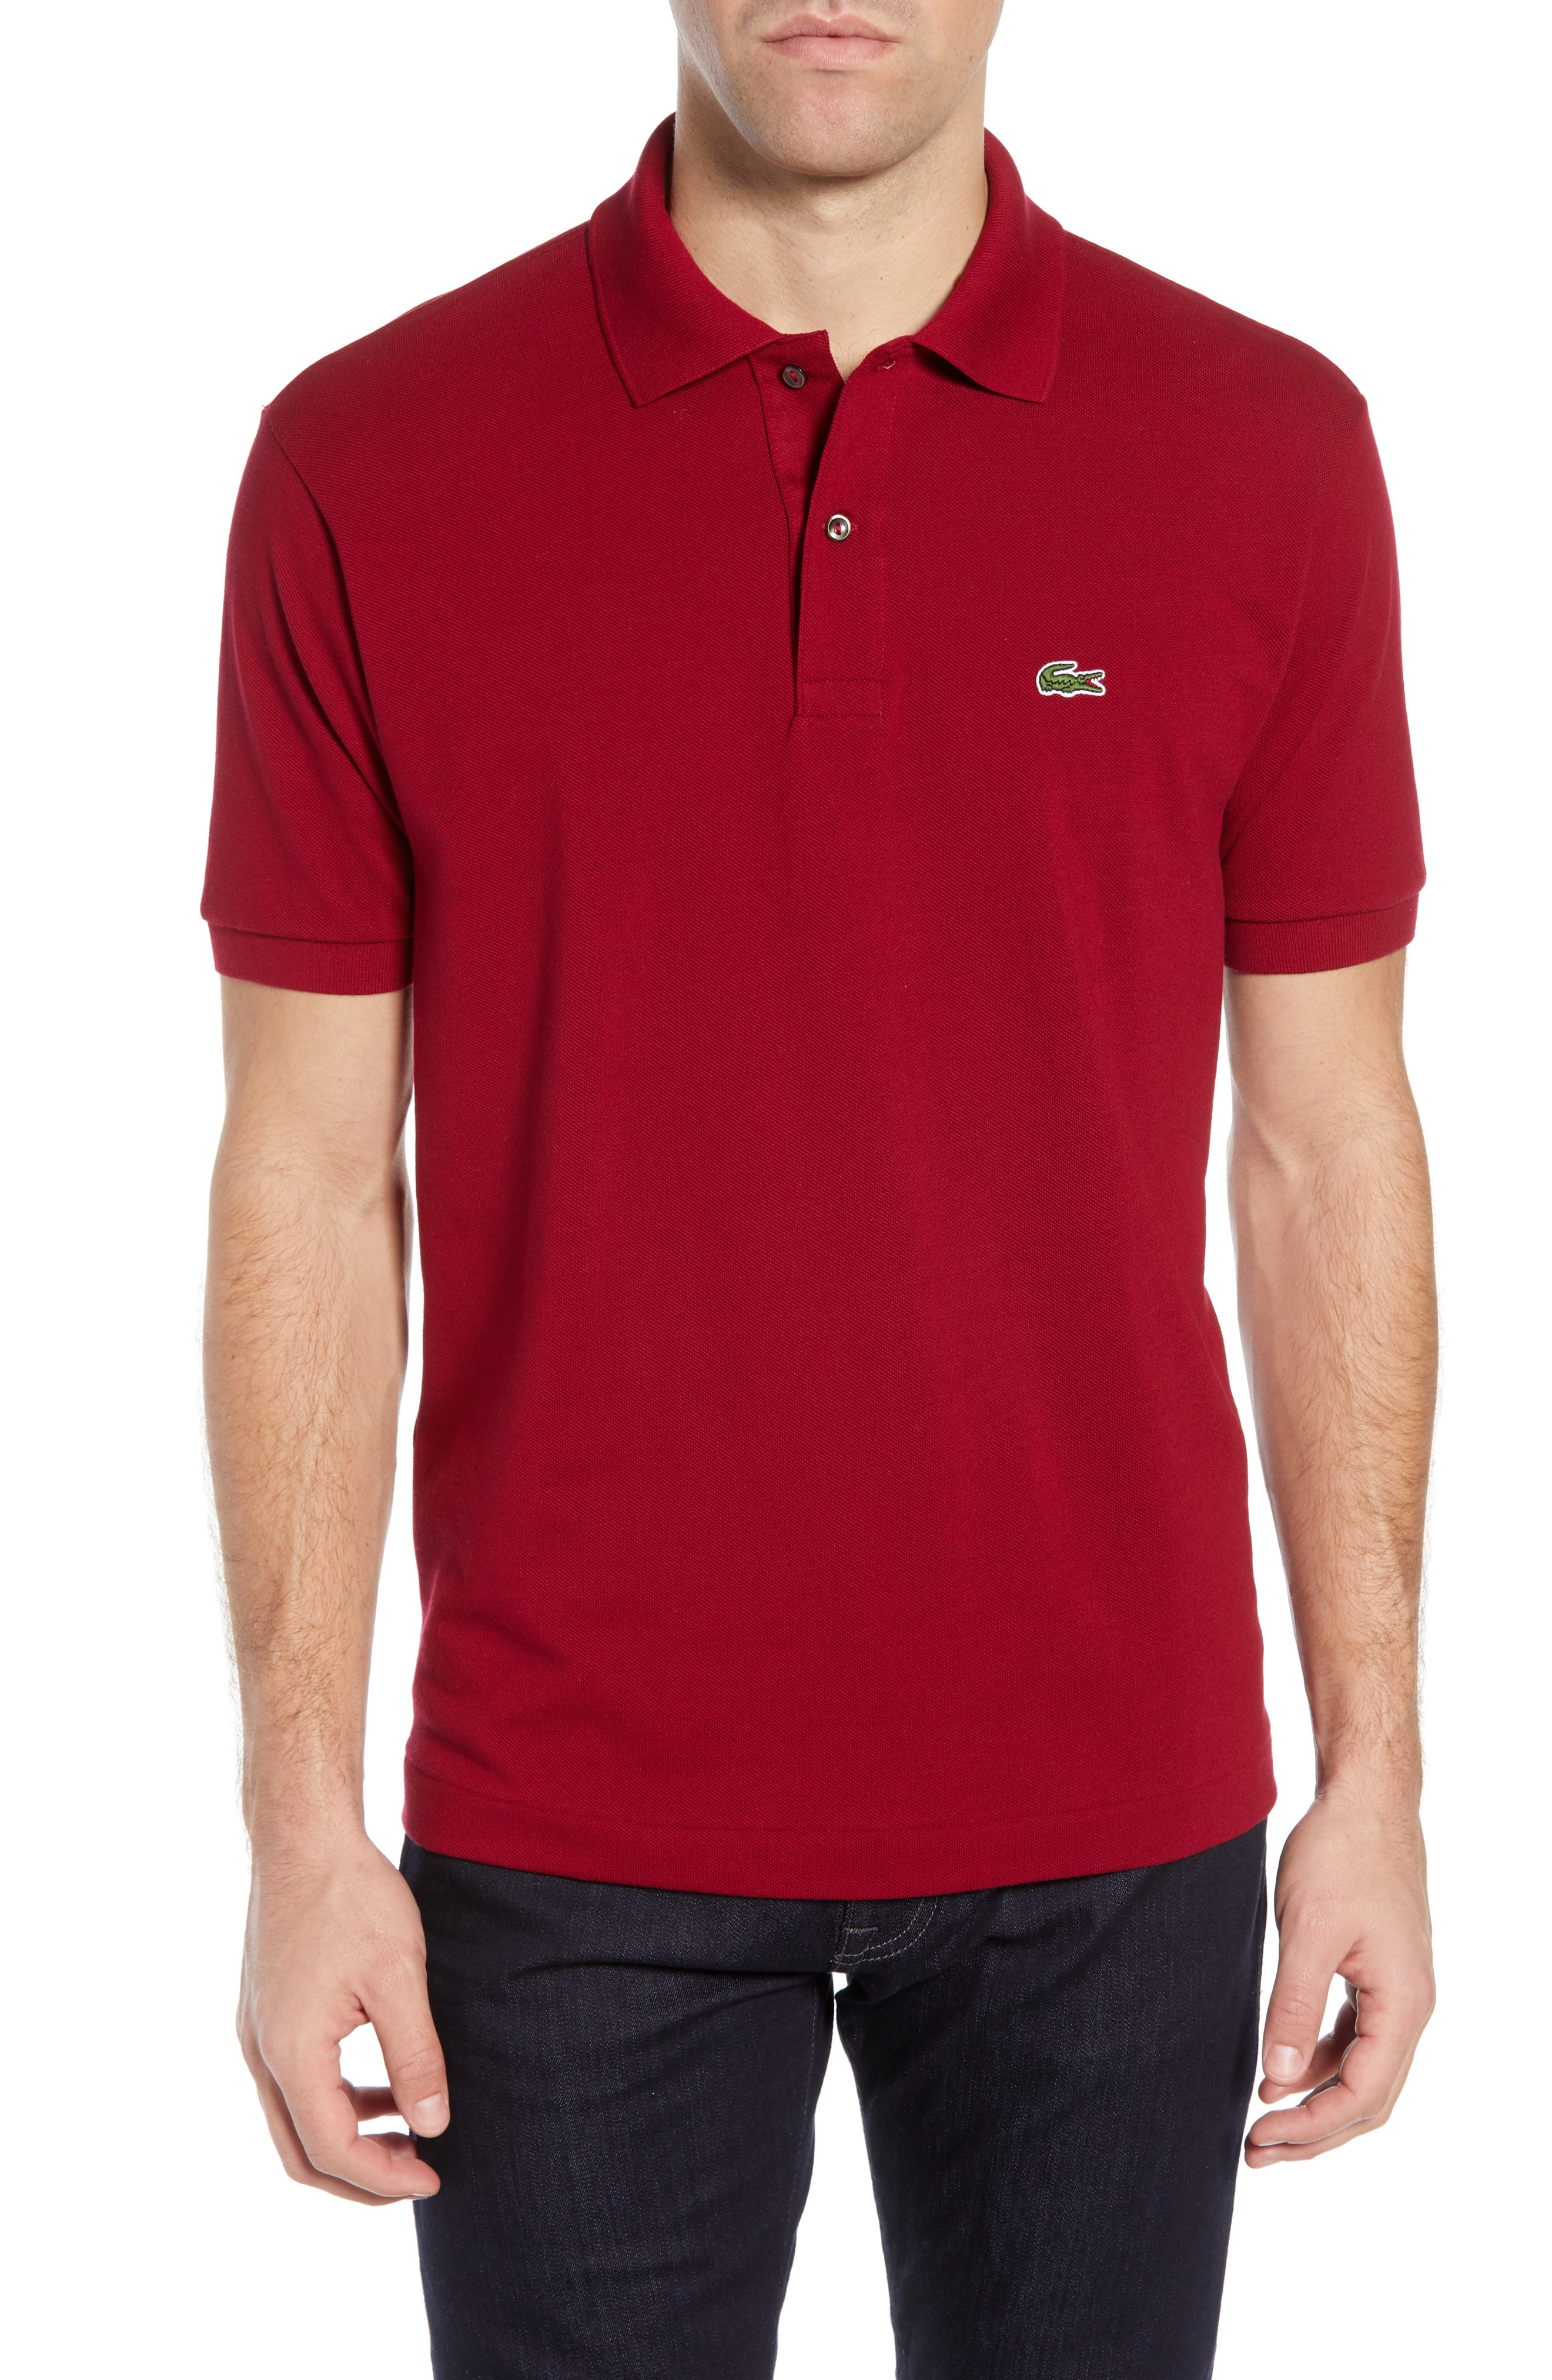 Red polo shirts-for the stylish man